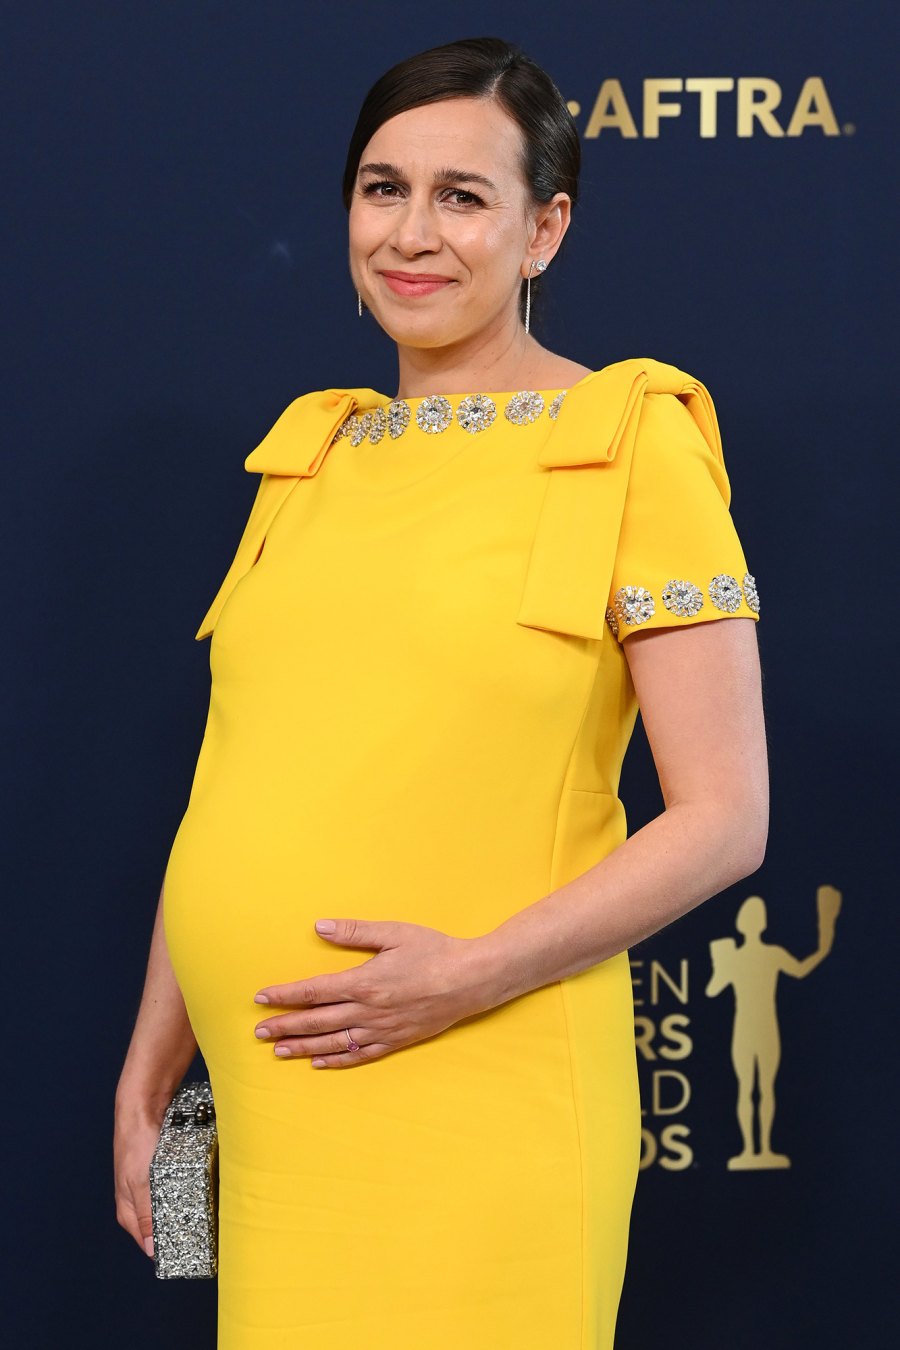 Pregnant Stars Show Baby Bumps at SAG Awards- Natalie Portman, Busy Philipps and More - Charity Wakefield - 958 - Lucia Aniello.